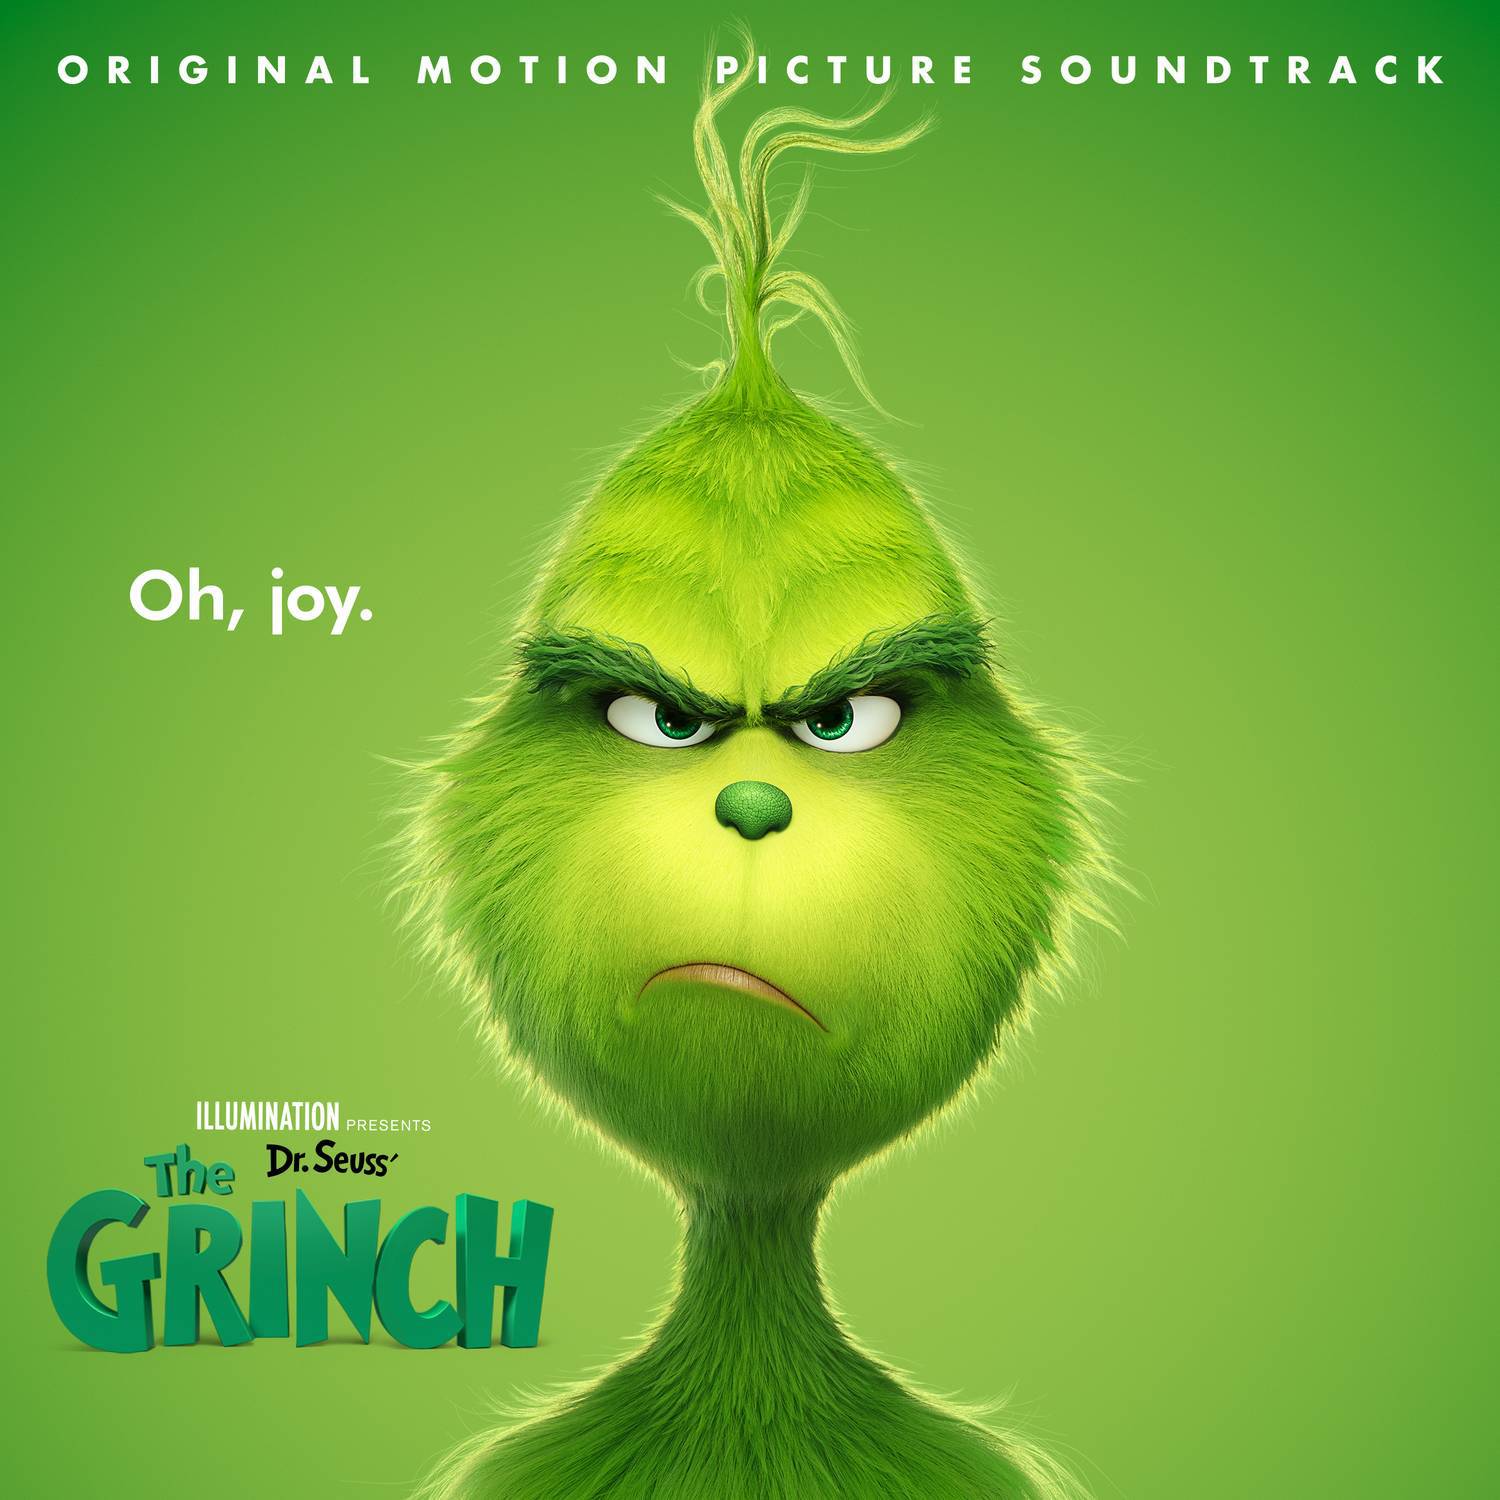 You're A Mean One, Mr. Grinch (From Dr. Seuss' The Grinch)